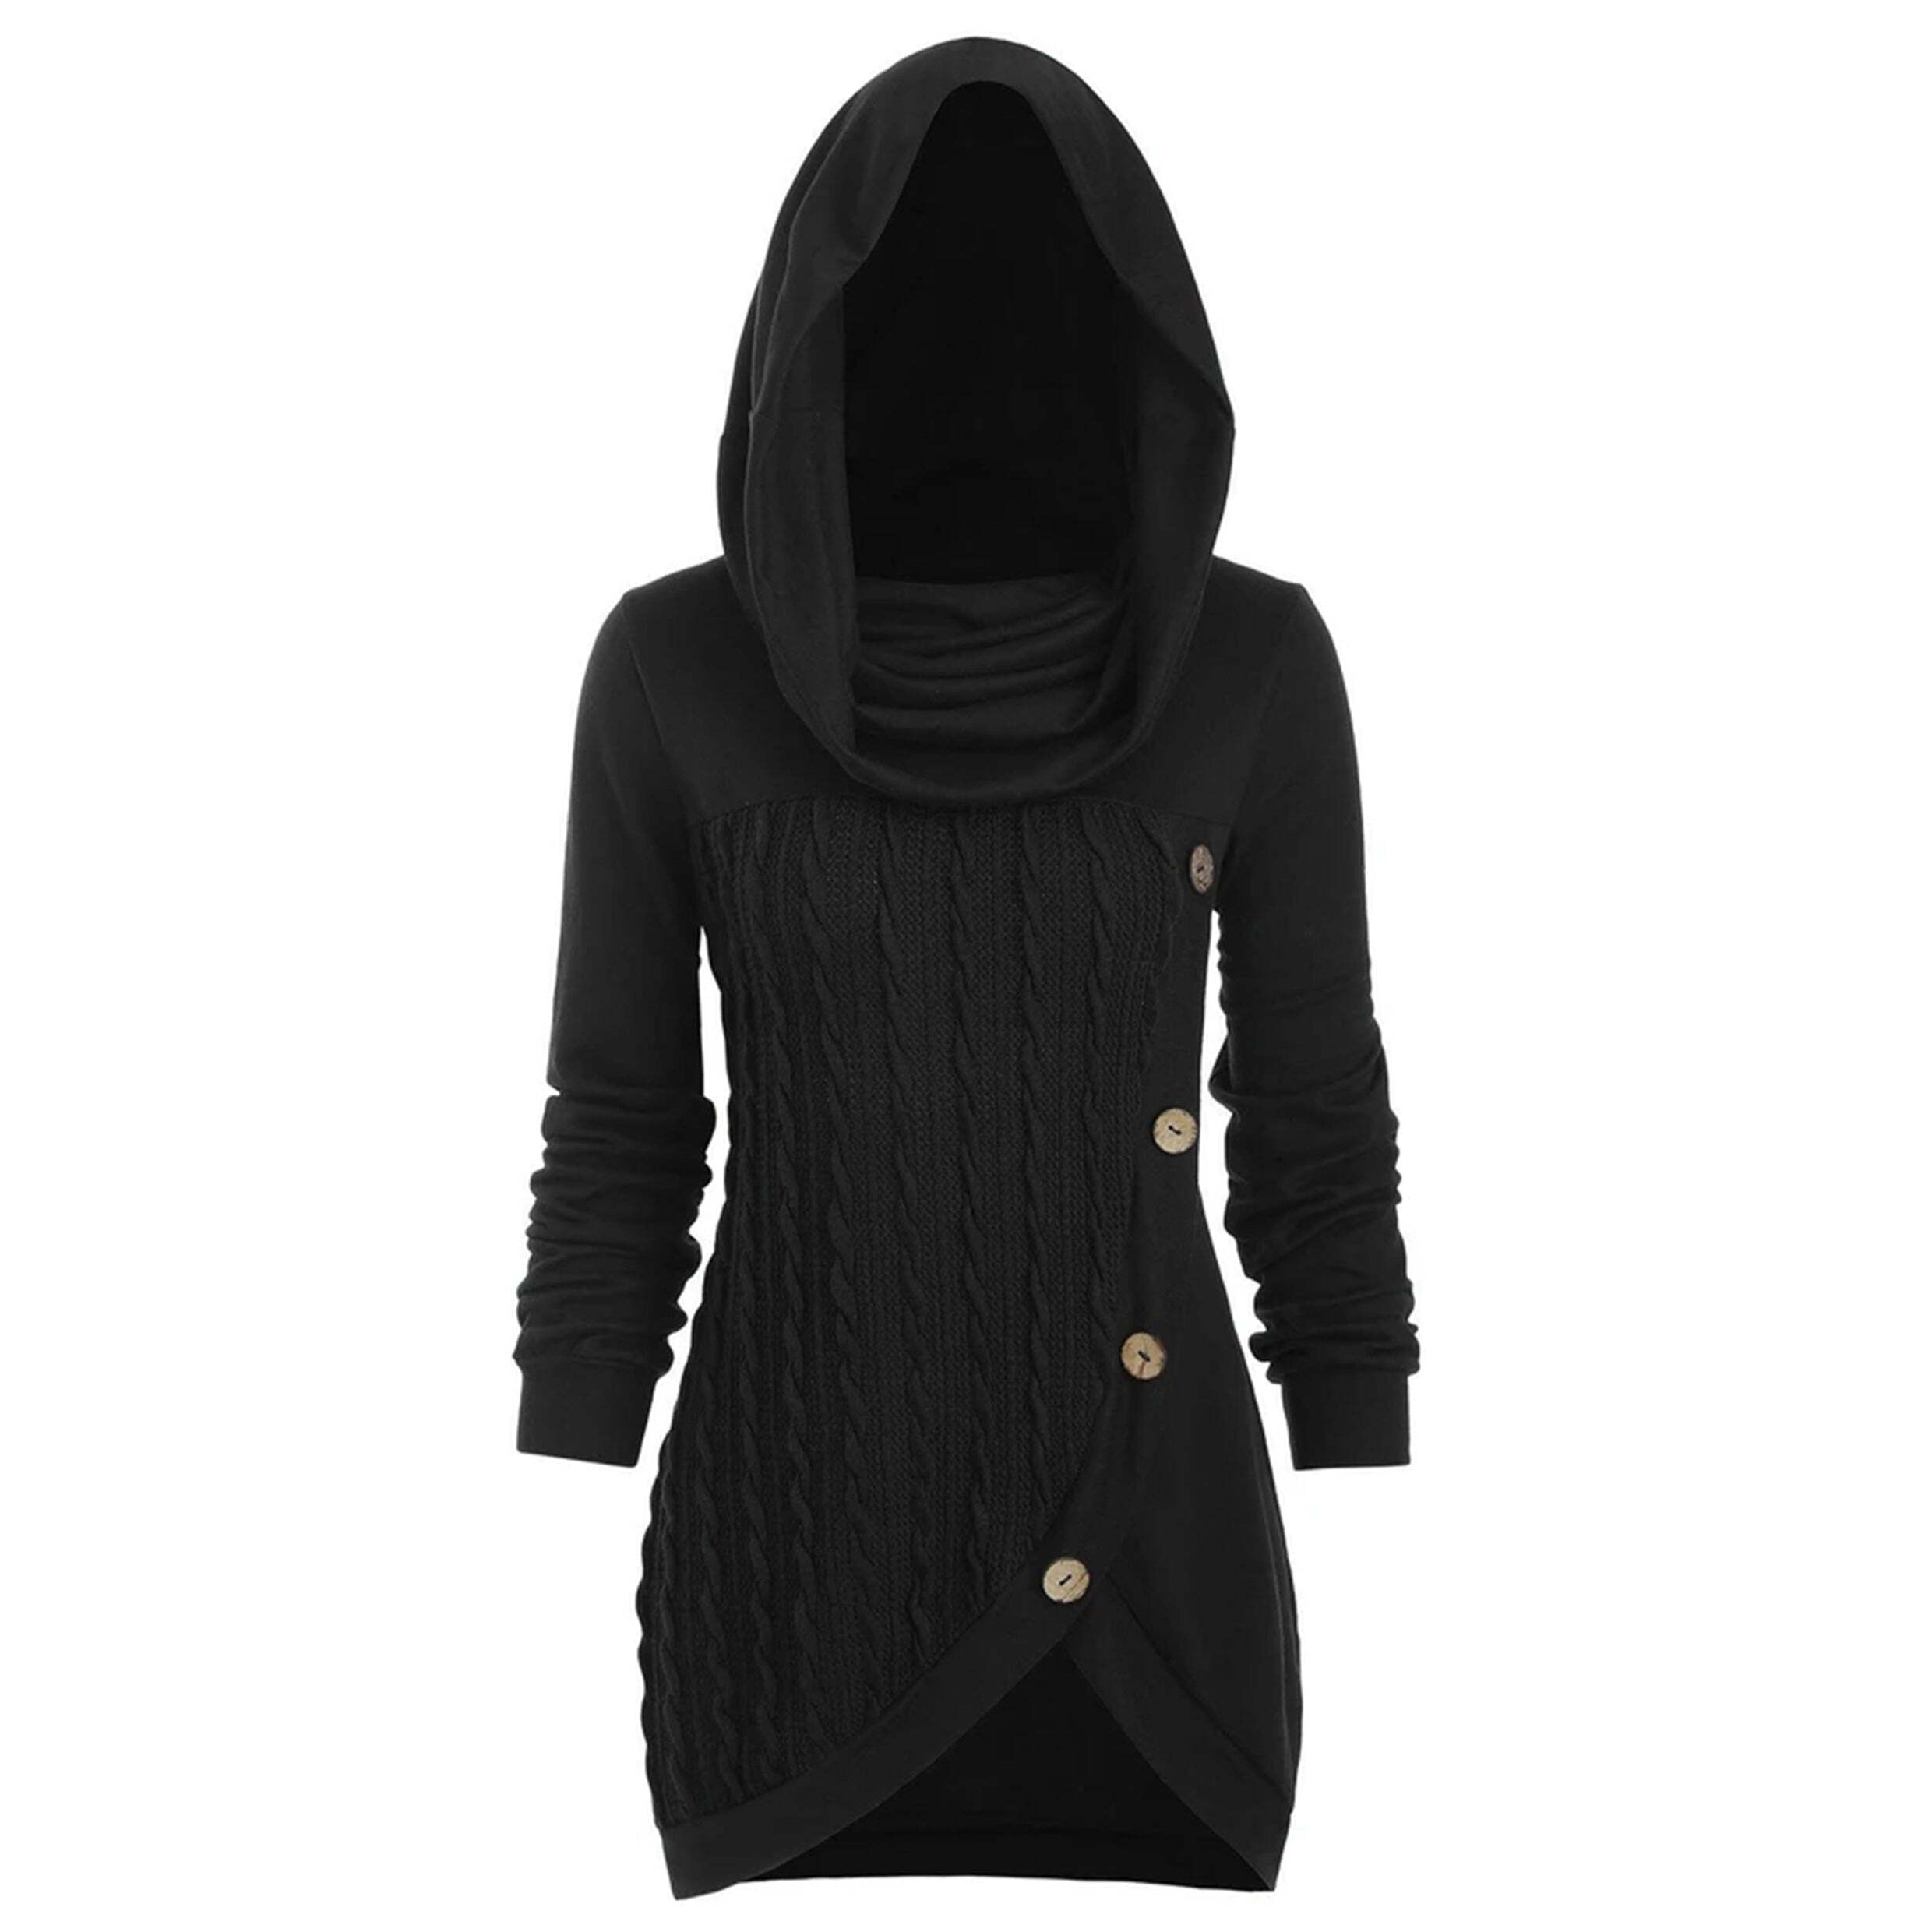 Gorgeous Hooded Dress